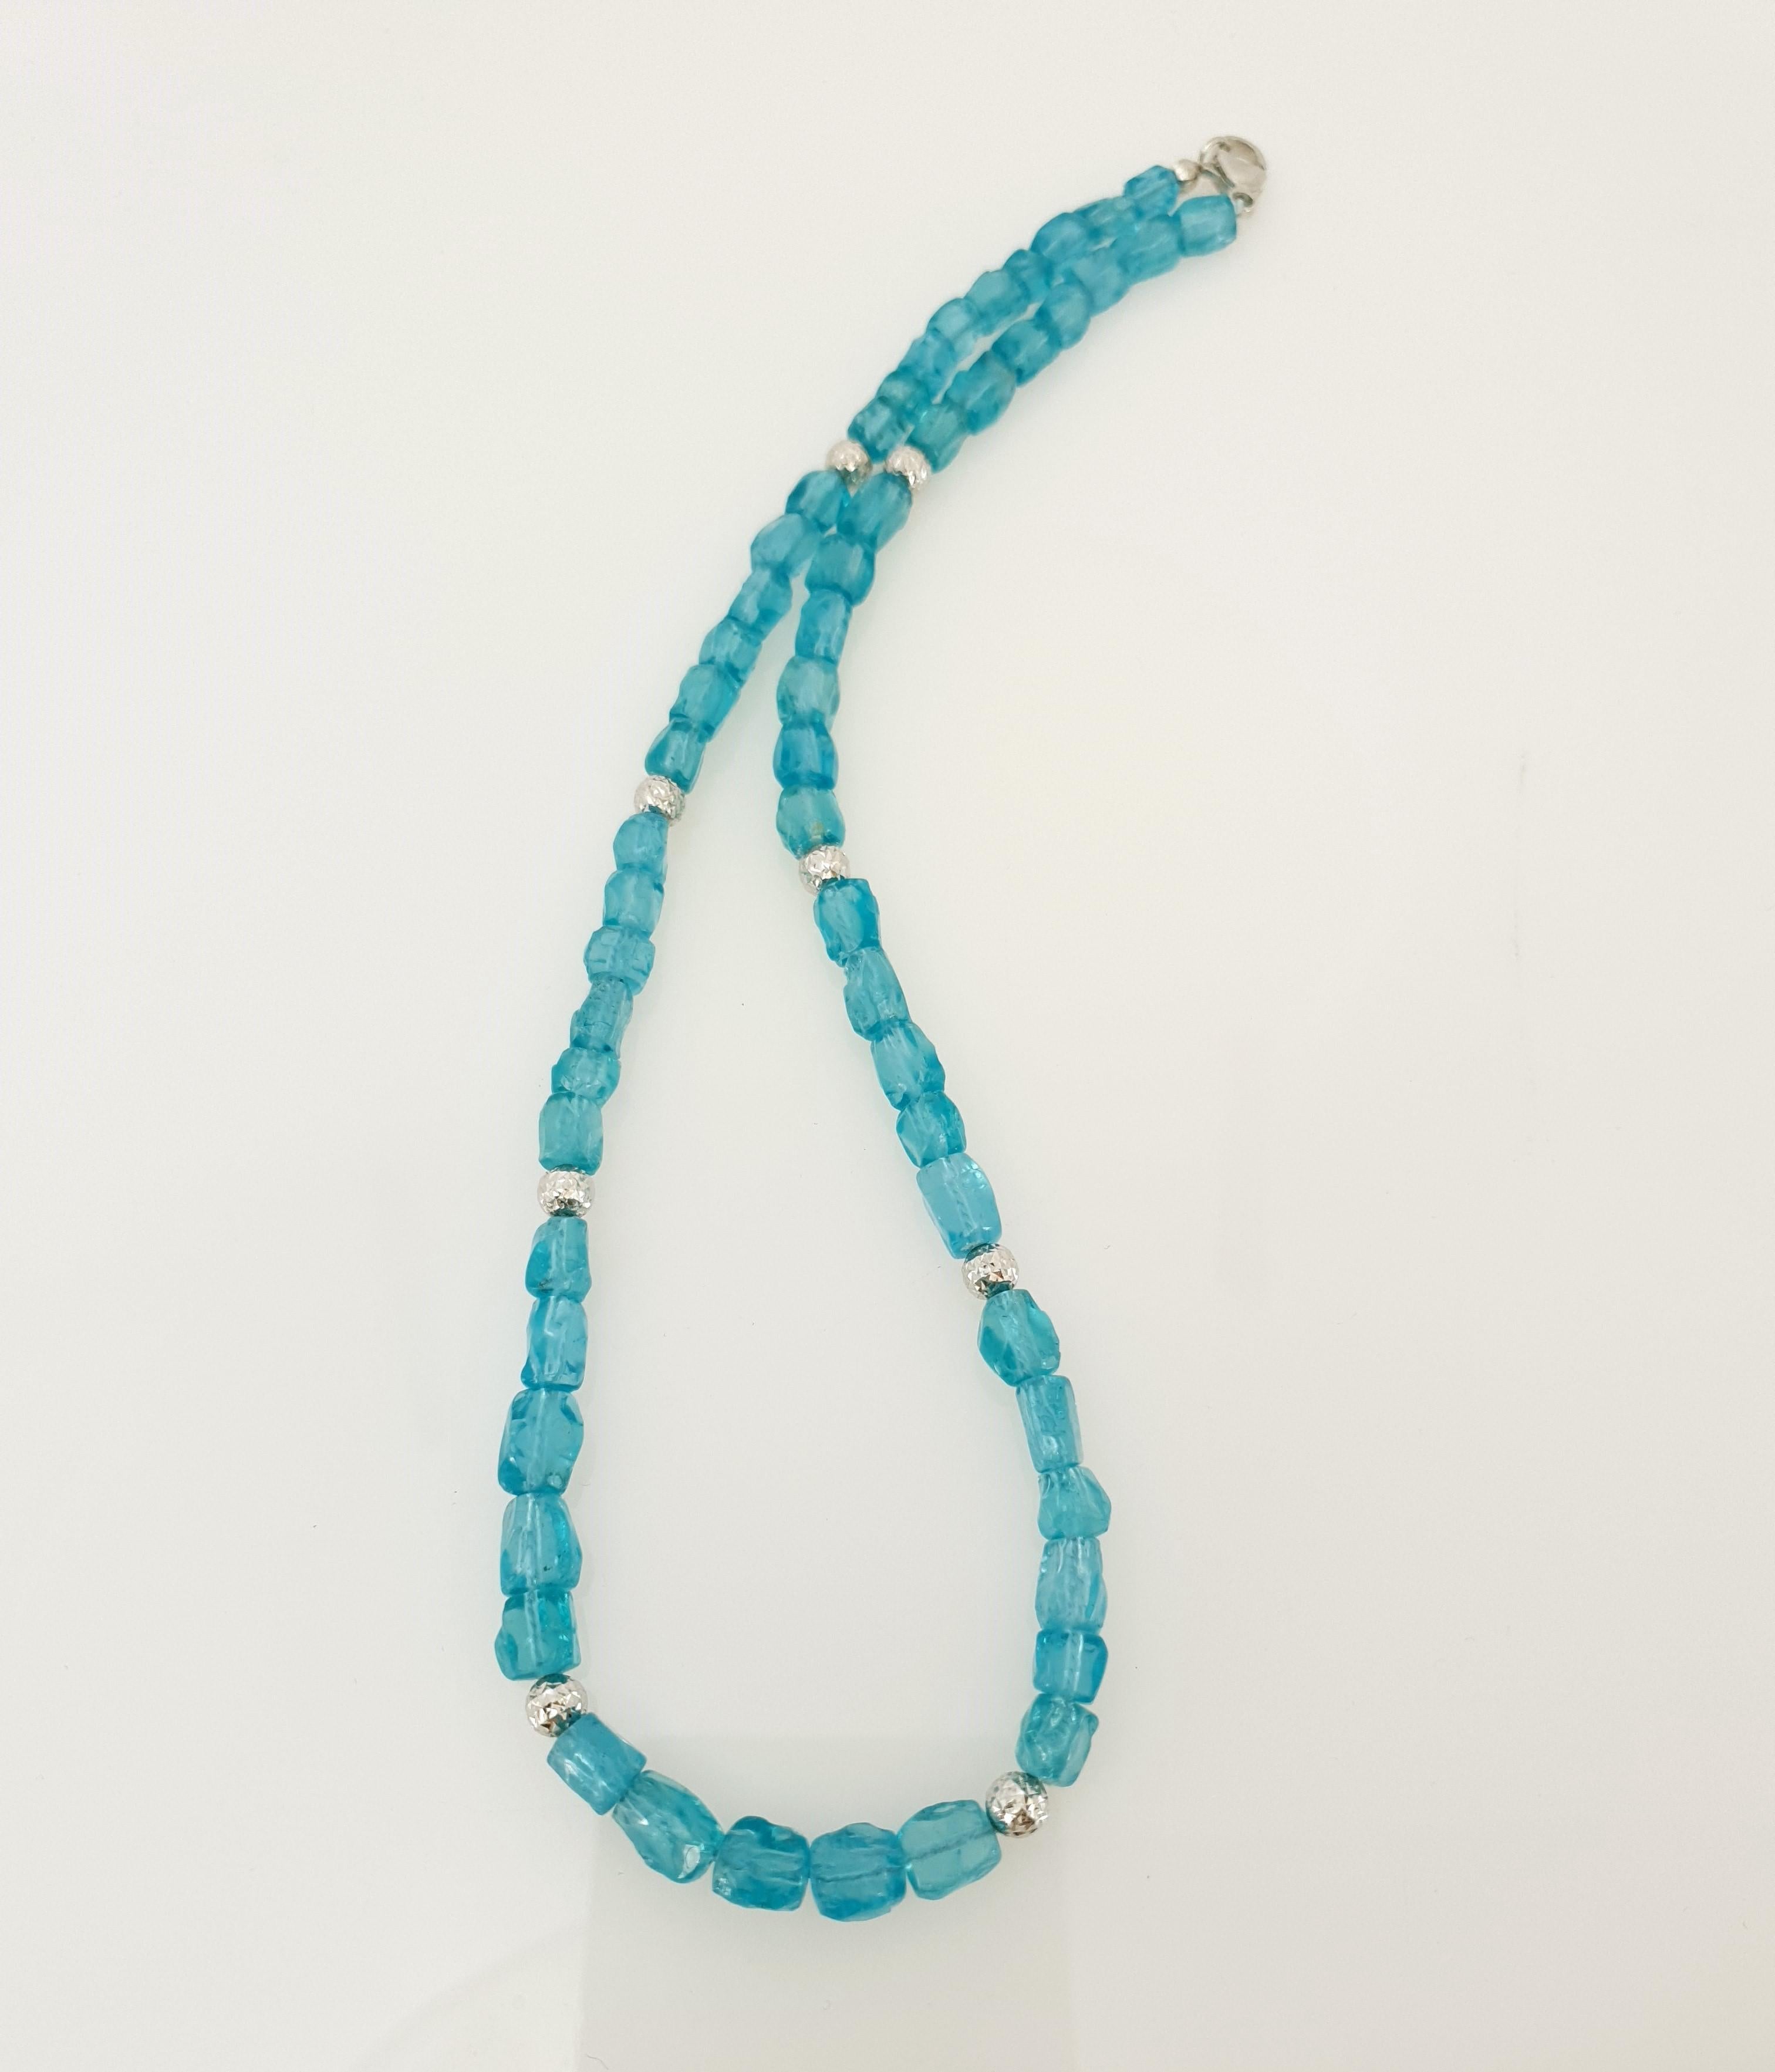 Paraiba Blue Apatite Nugget Beaded Necklace with 18 Carat White Gold 4